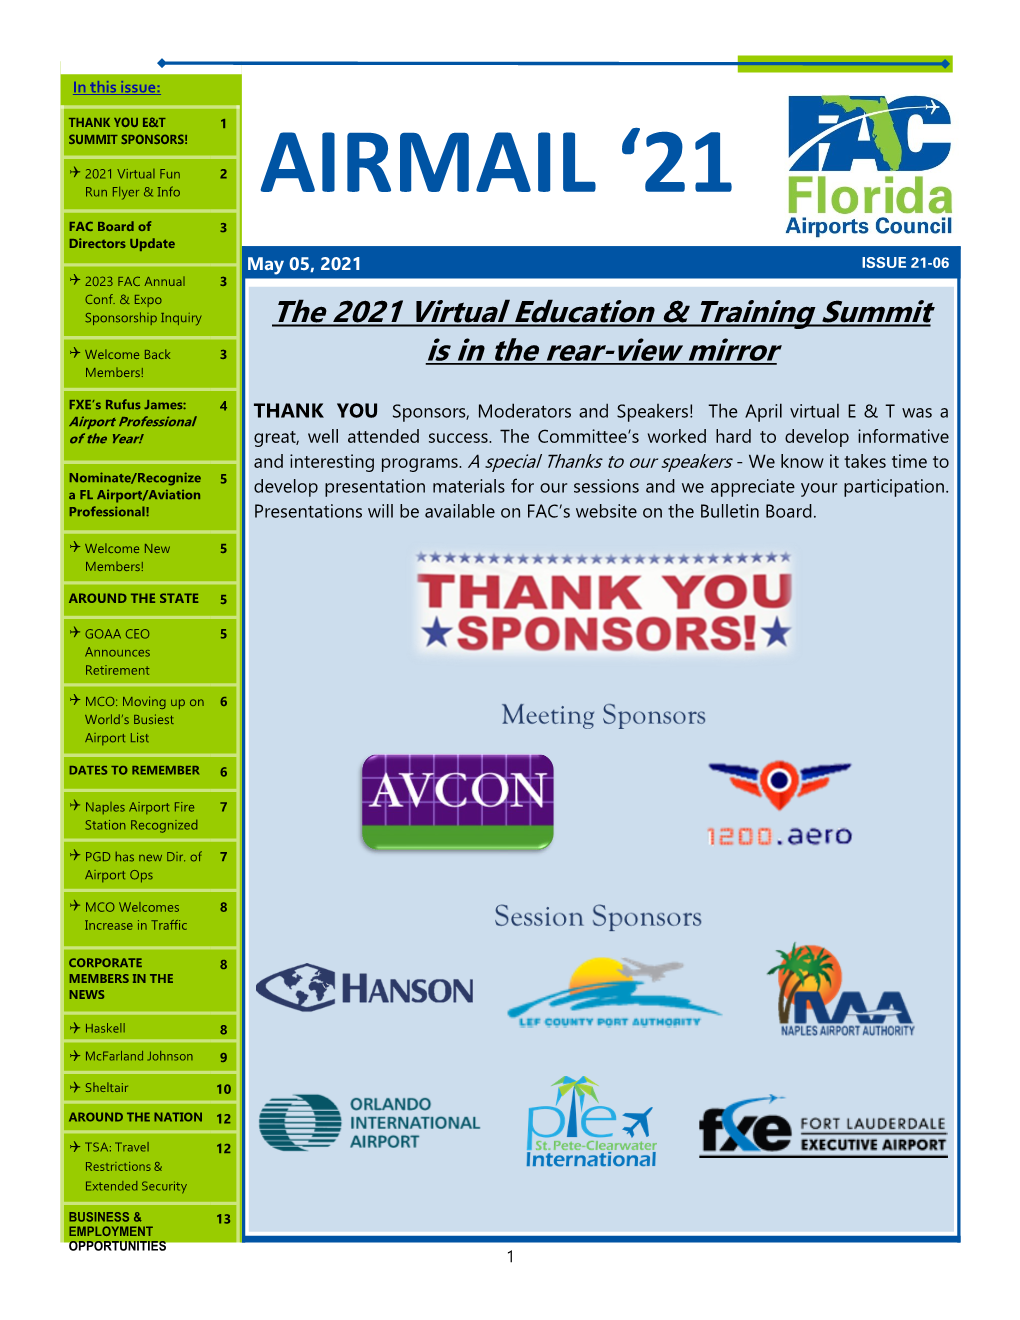 AIRMAIL ‘21 FAC Board of 3 Directors Update May 05, 2021 Issueissue 21 21-06-06  2023 FAC Annual 3 Conf